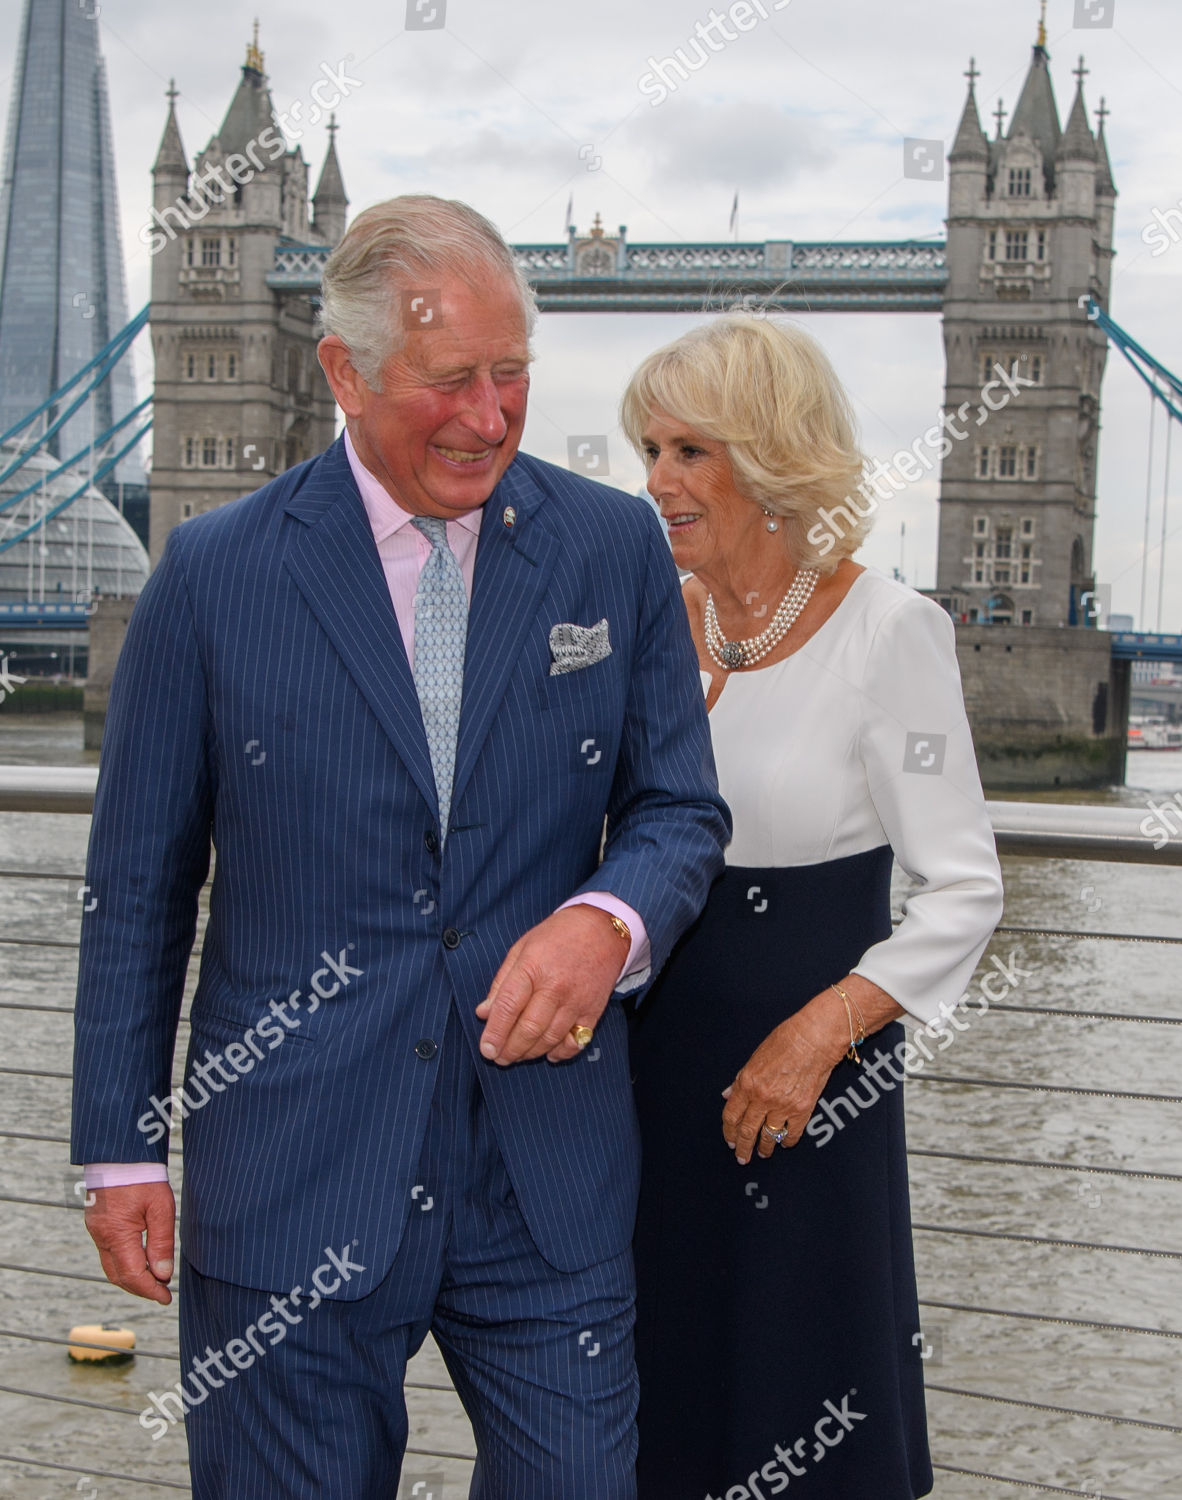 prince-charles-carries-out-royal-engagements-london-uk-shutterstock-editorial-9863246bo.jpg